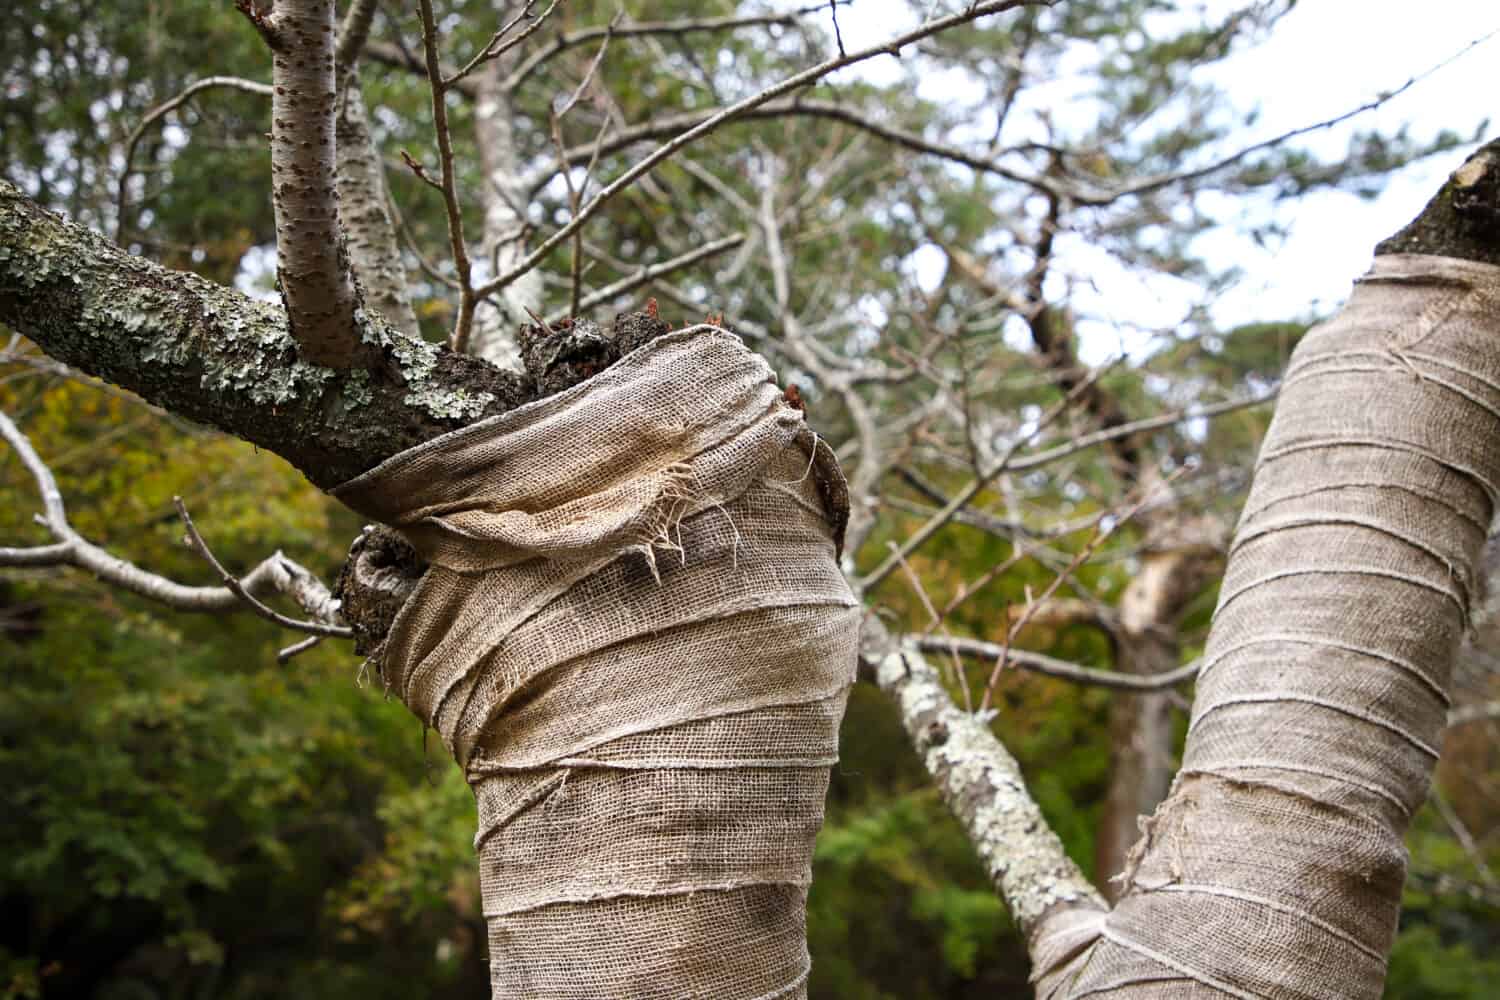 The trunk of a tree wrapped in sackcloth In order to treat the bark